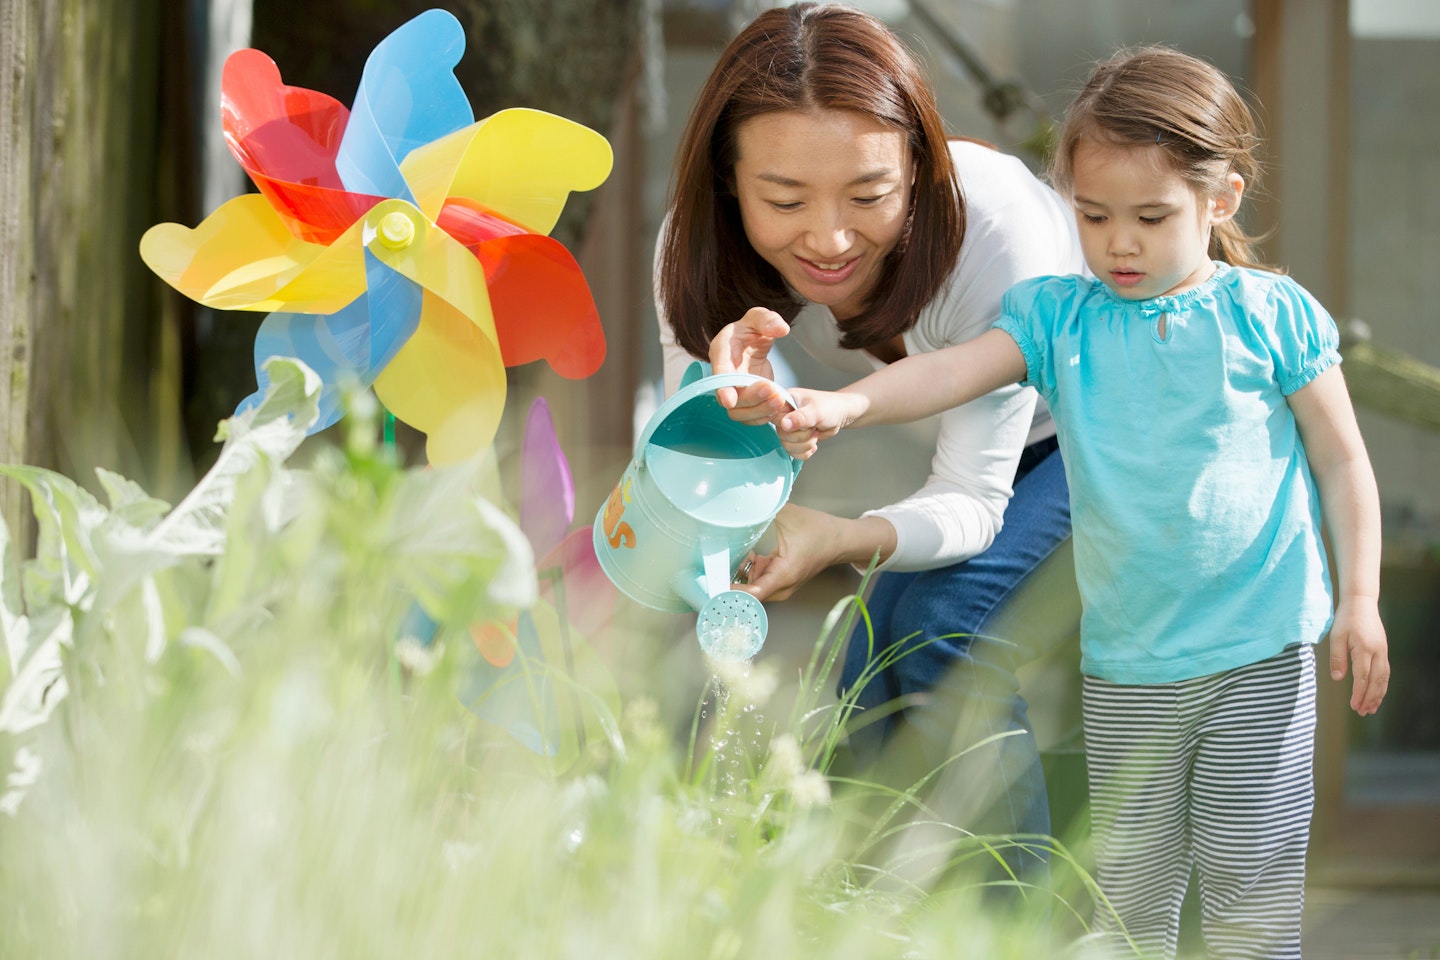 Wellbeing activities for kids grow something